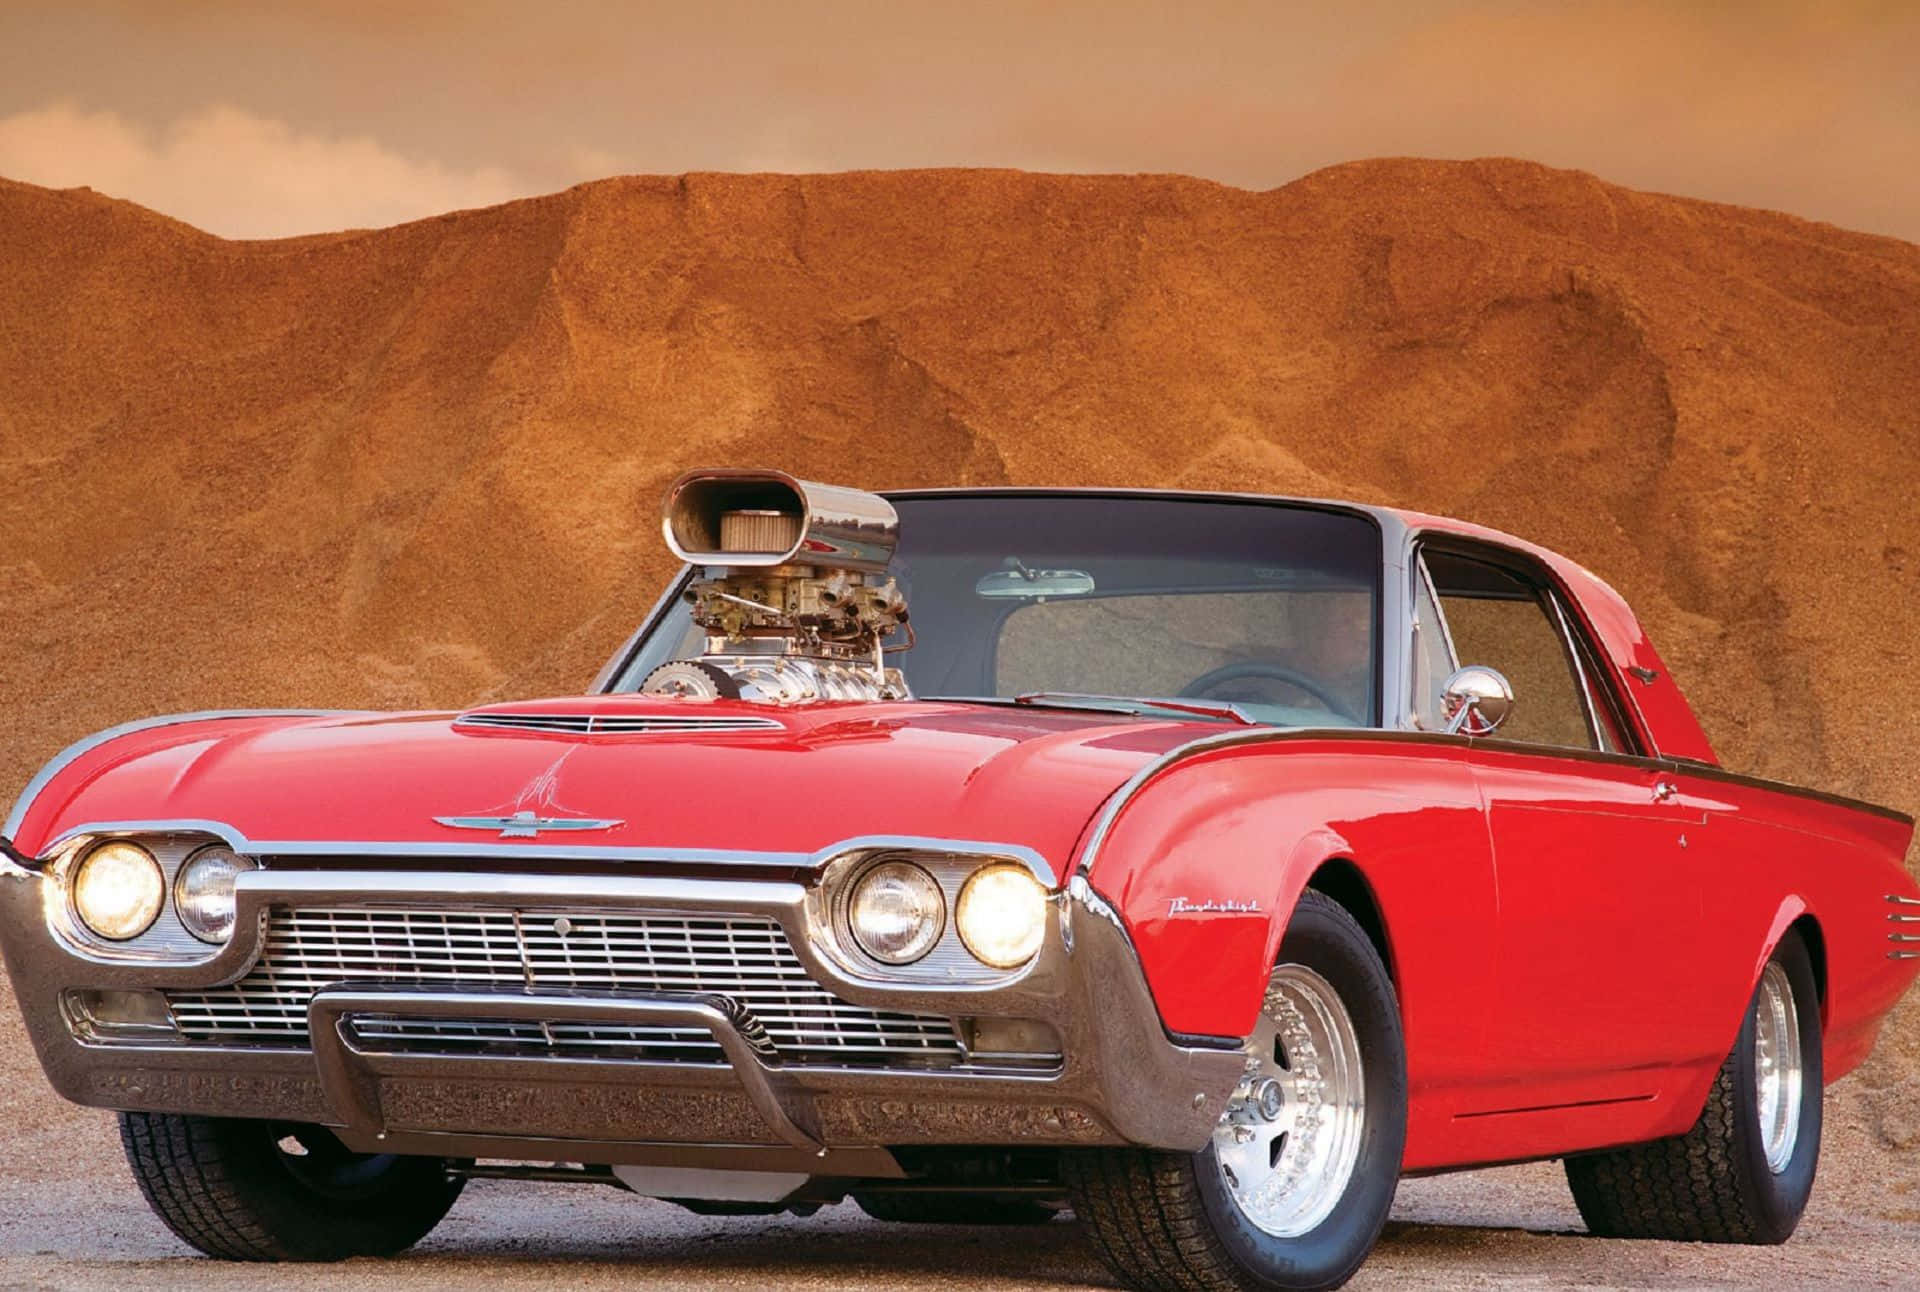 Classic Ford Thunderbird in a Garage Wallpaper